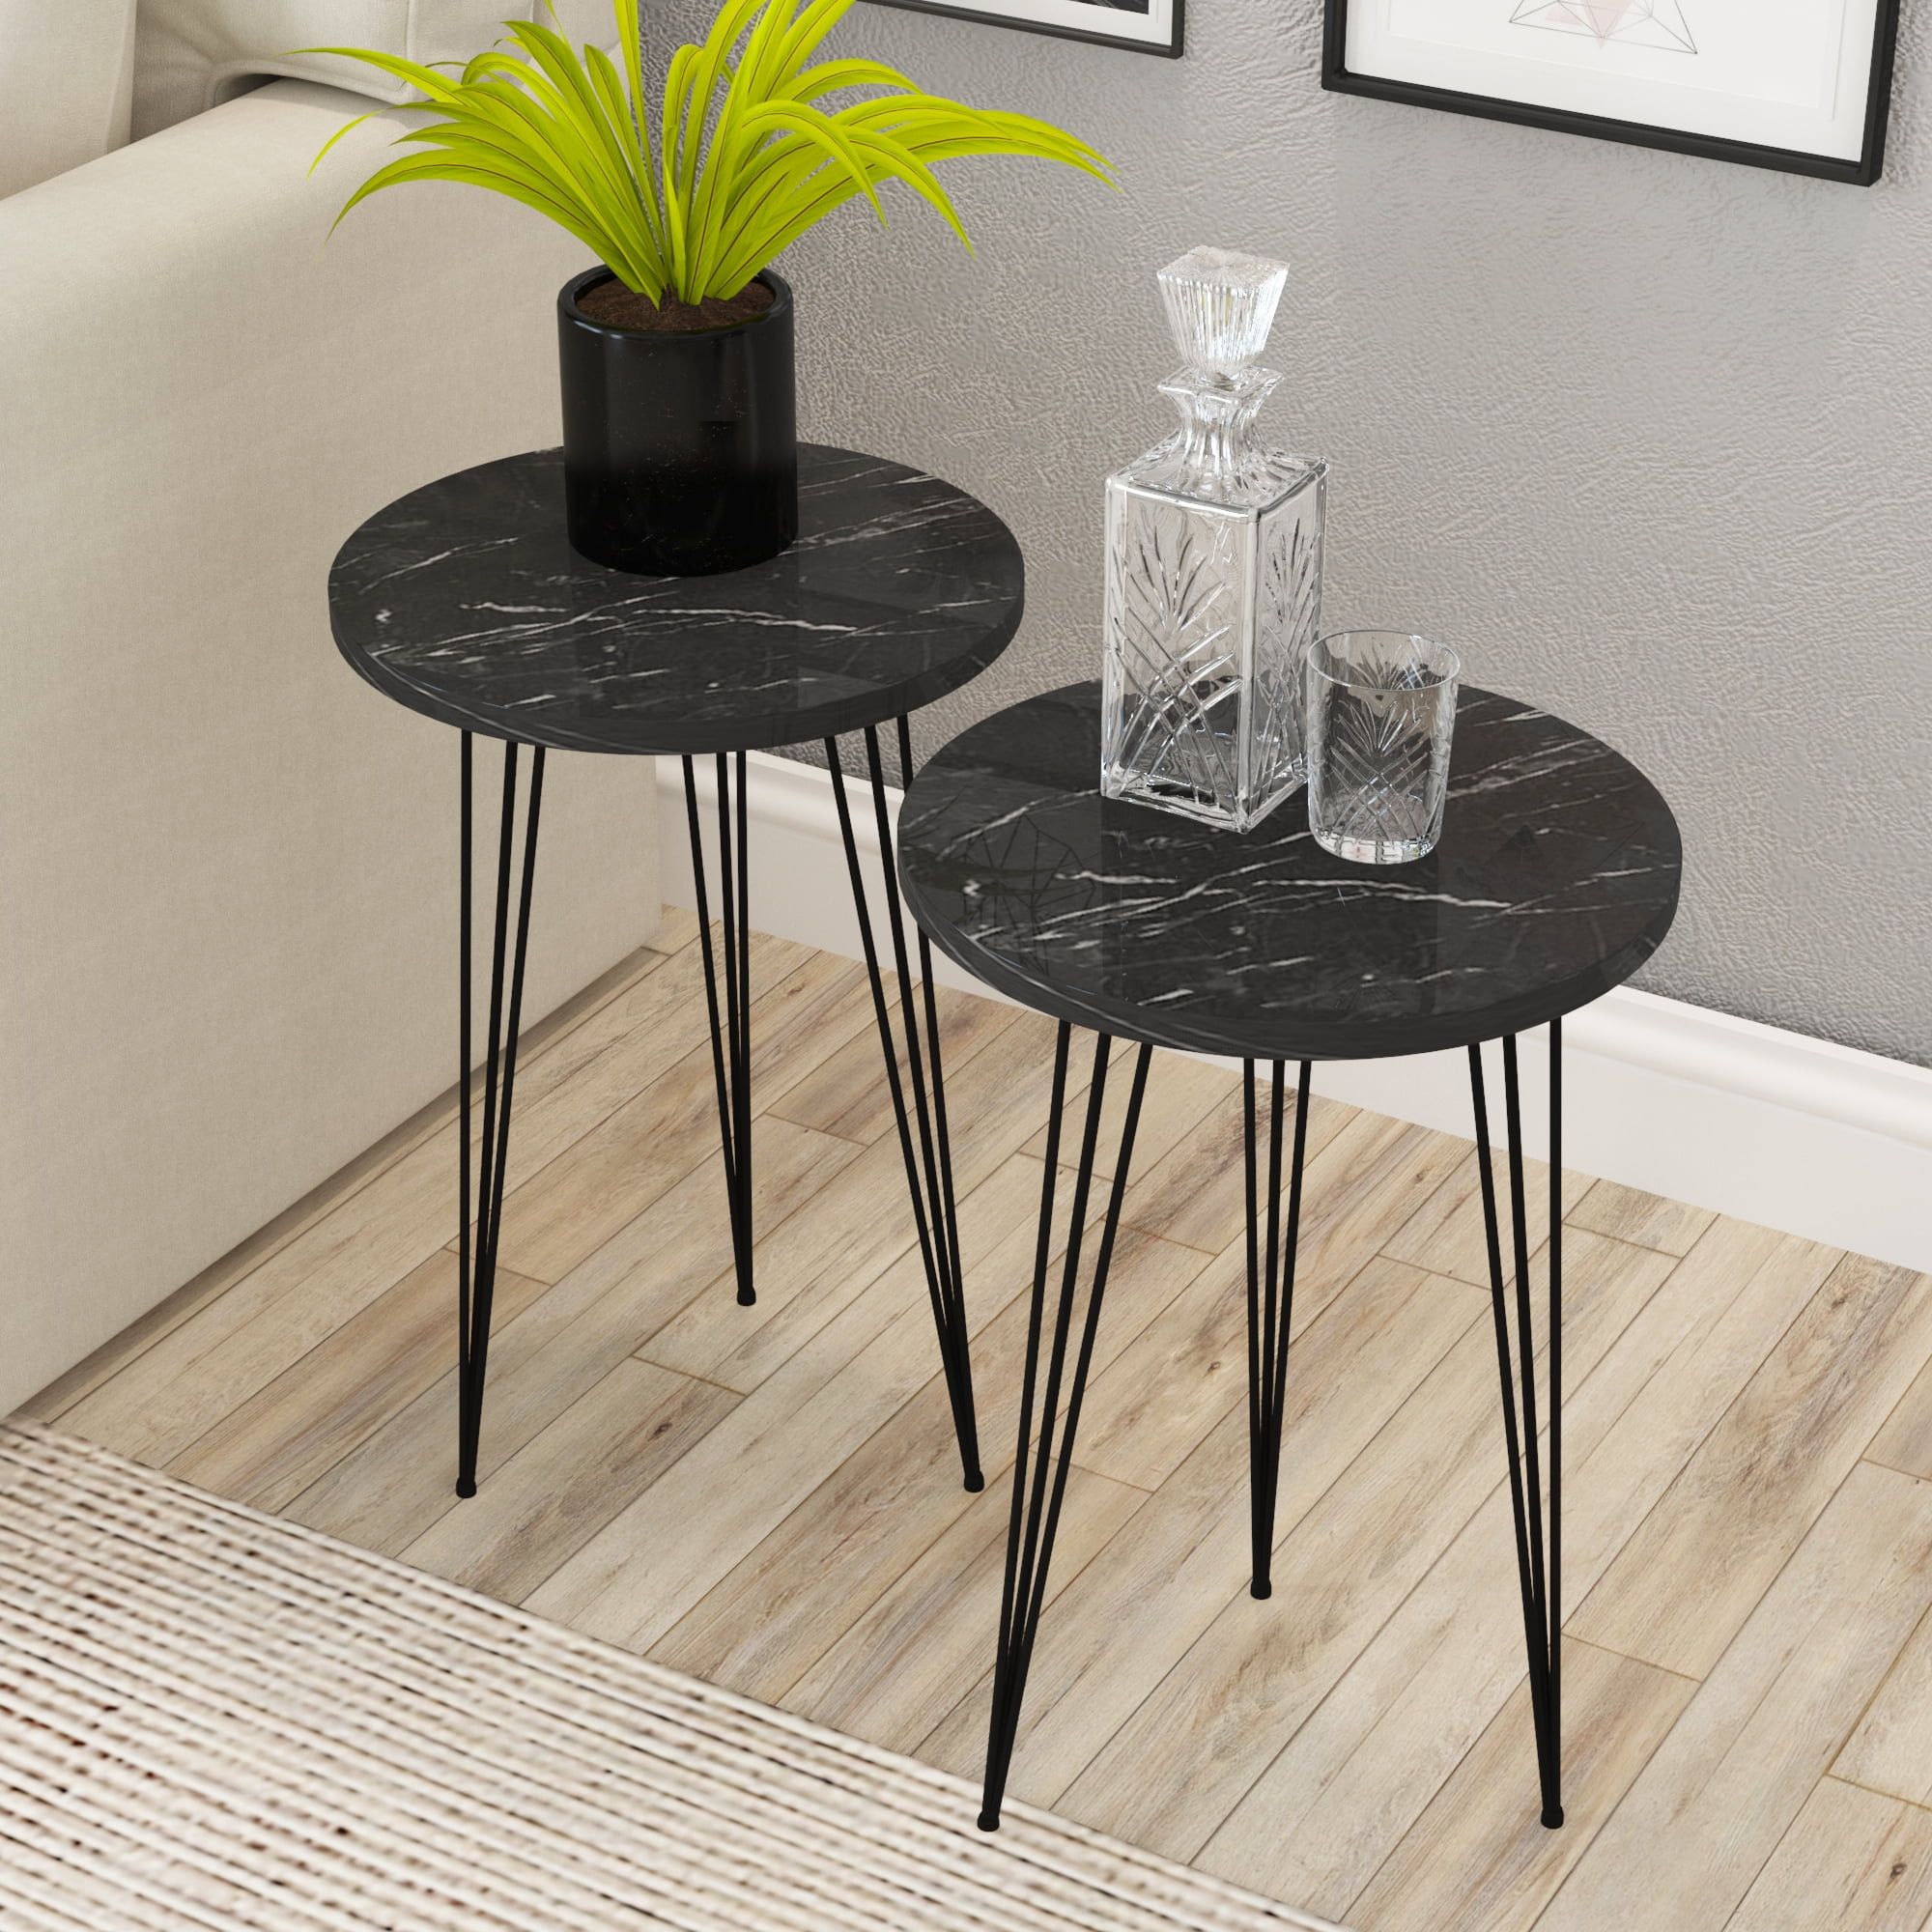 Pak Home Set Of 2 End Table – Round Wood Sofa Side Tables For Small Spaces,  Nightstand Bedside Table With Metal Legs For Bedroom, Living Room, Office,  Balcony (Black High Gloss) – Walmart Pertaining To Metal Side Tables For Living Spaces (Photo 3 of 15)